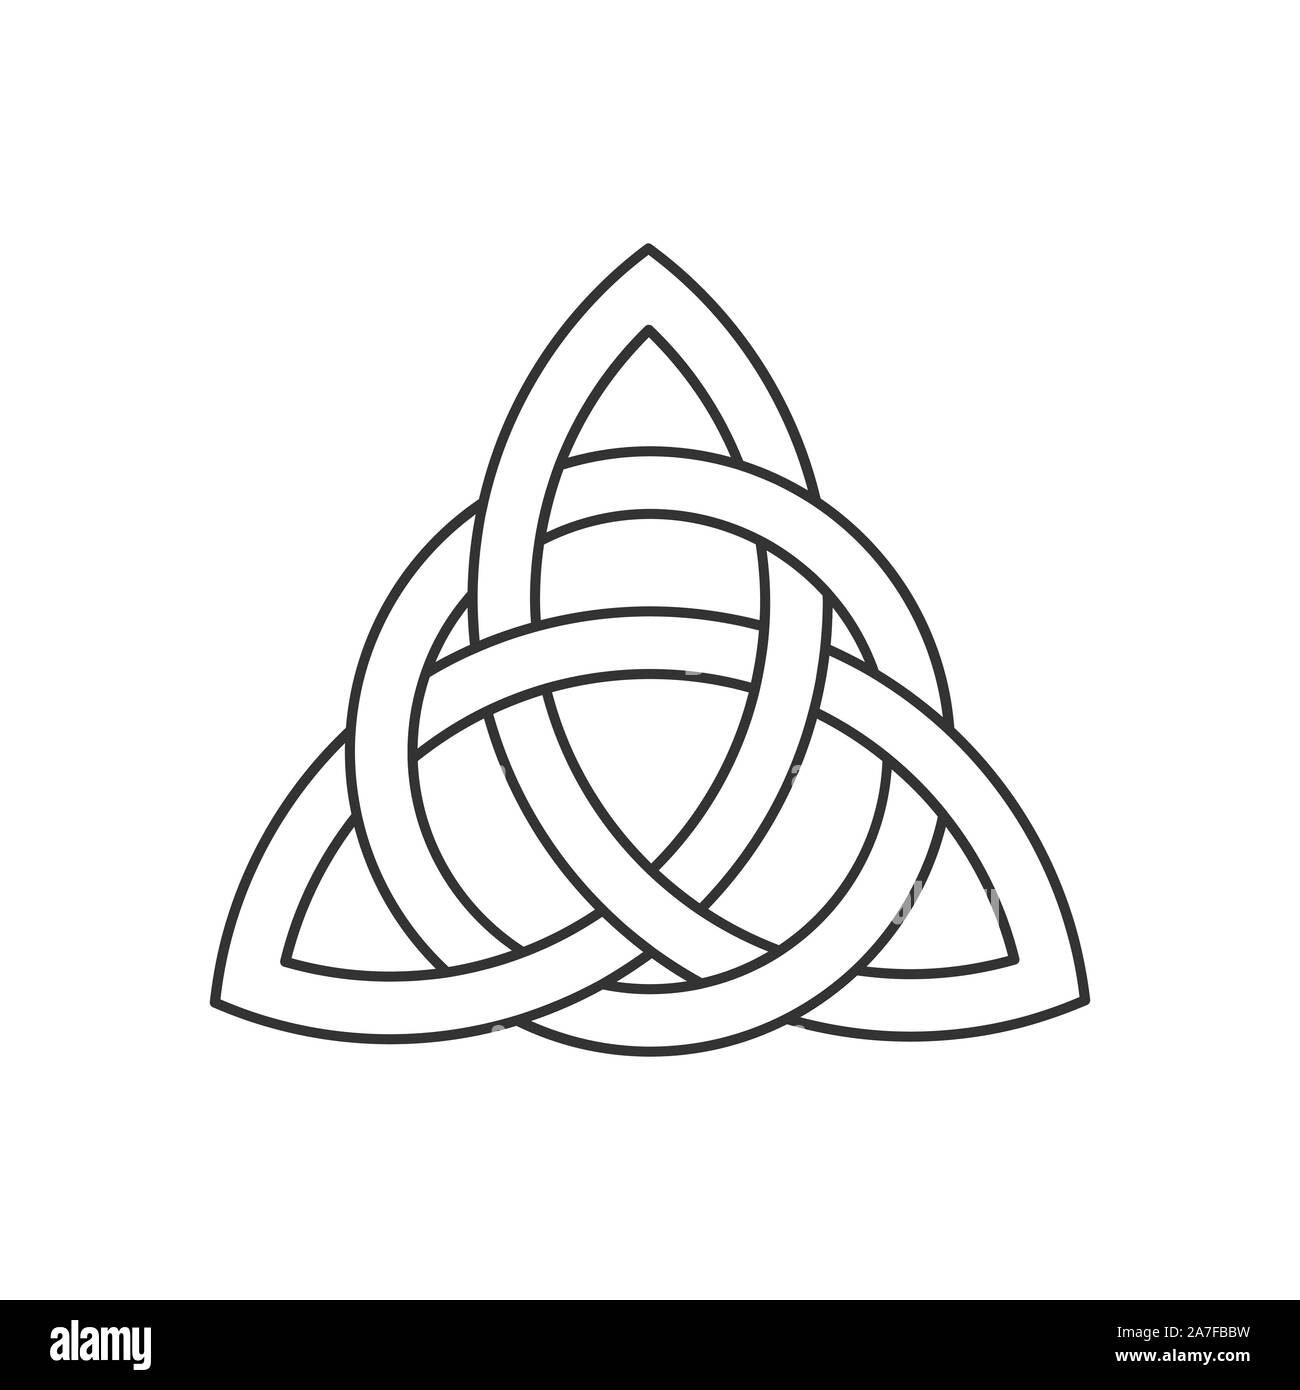 Linear Celtic trinity knot. Triquetra symbol interlaced with circle. Ancient ornament symbolizing eternity. Infinite loop sign interlocking. Vector Stock Vector